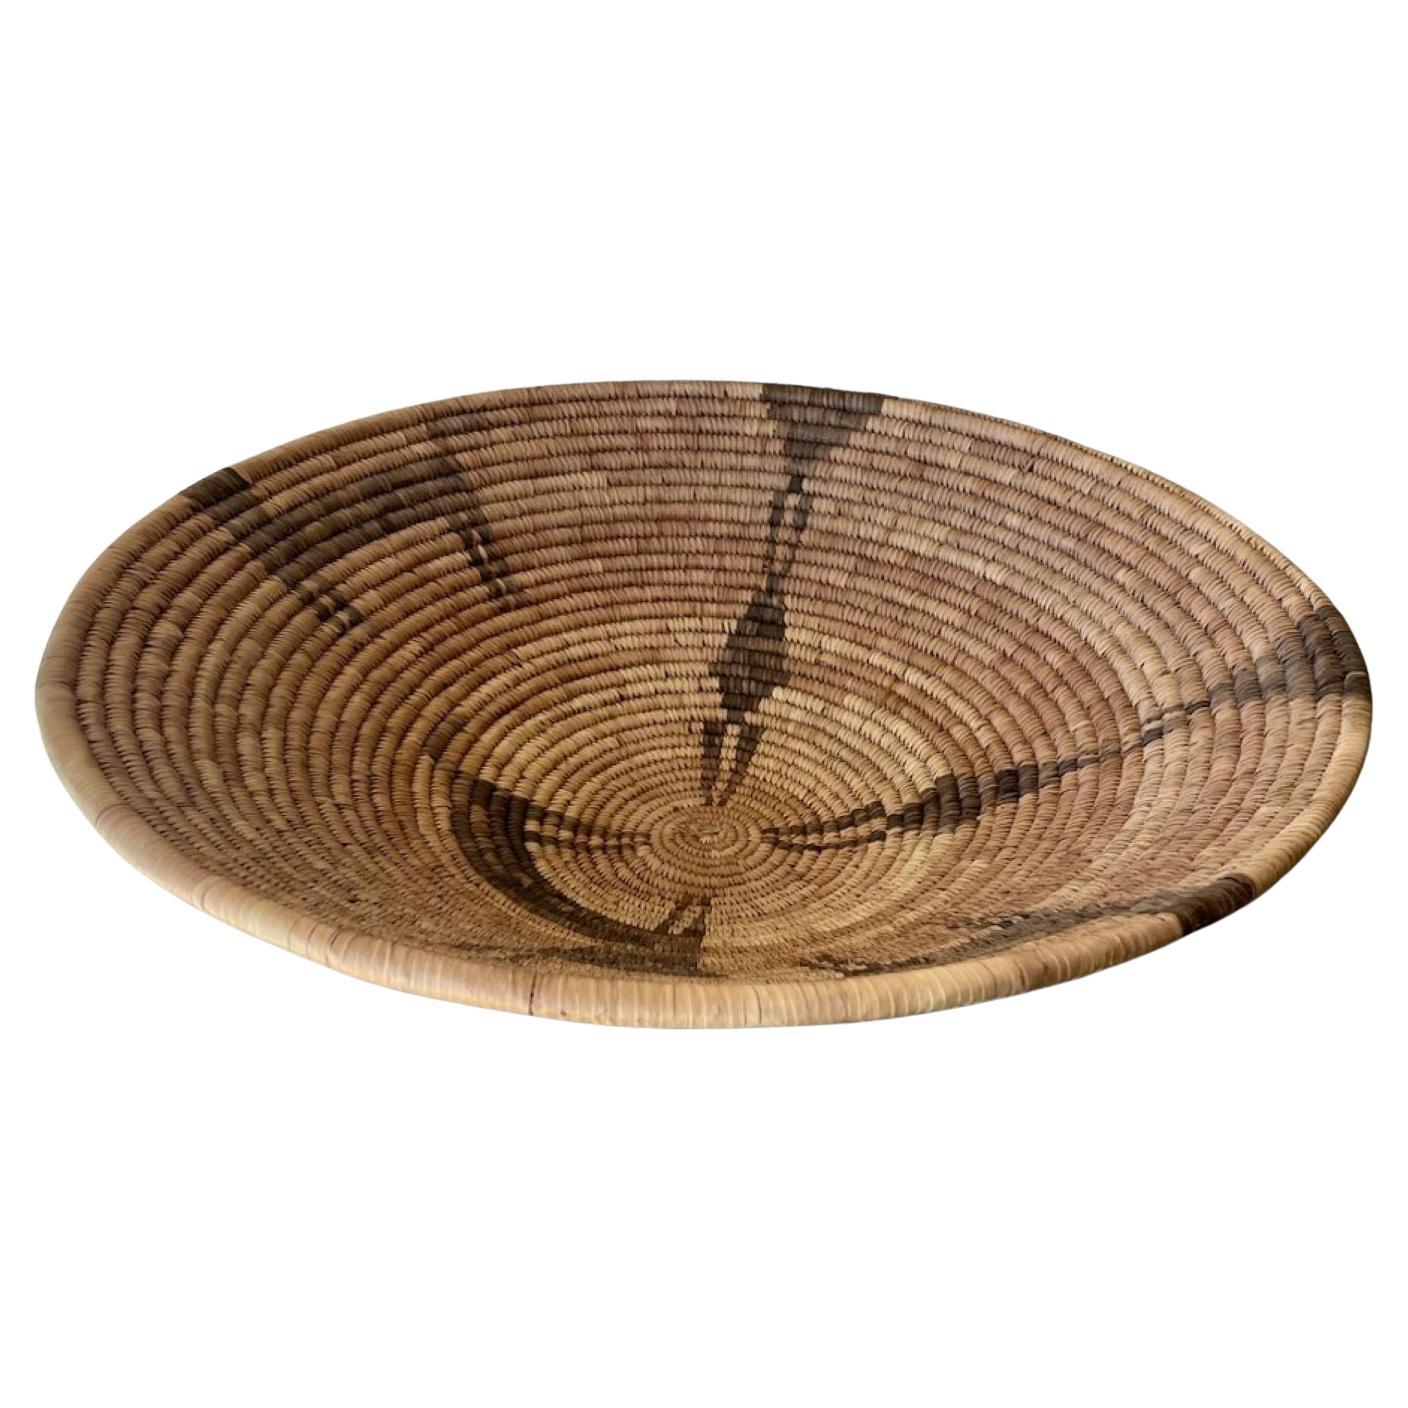 Papago Indian Woven Basket With Pictorial Motif For Sale at 1stDibs